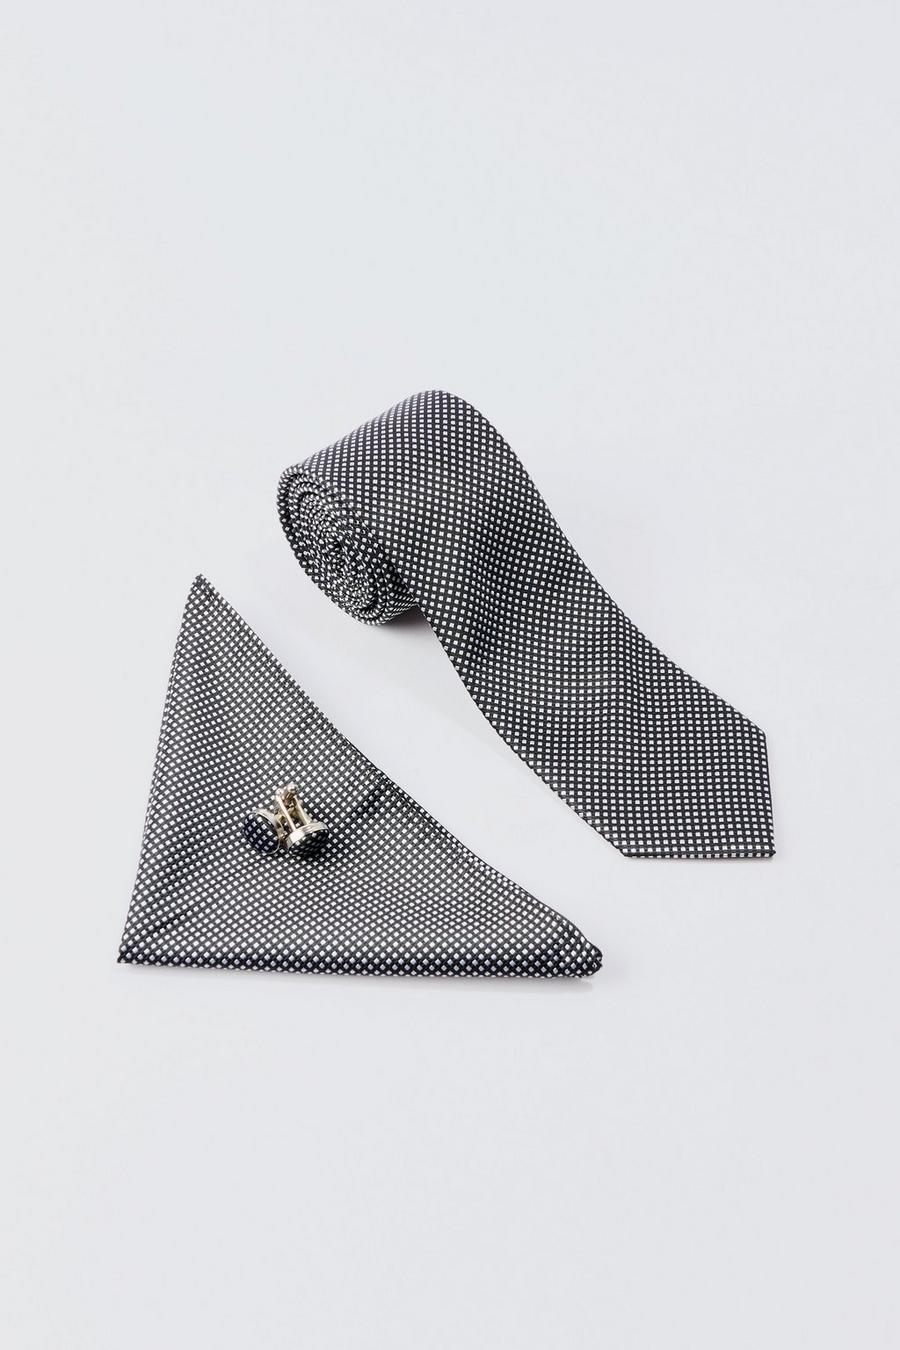 Slim Tie, Pocket Square And Cuff Links Set In Black